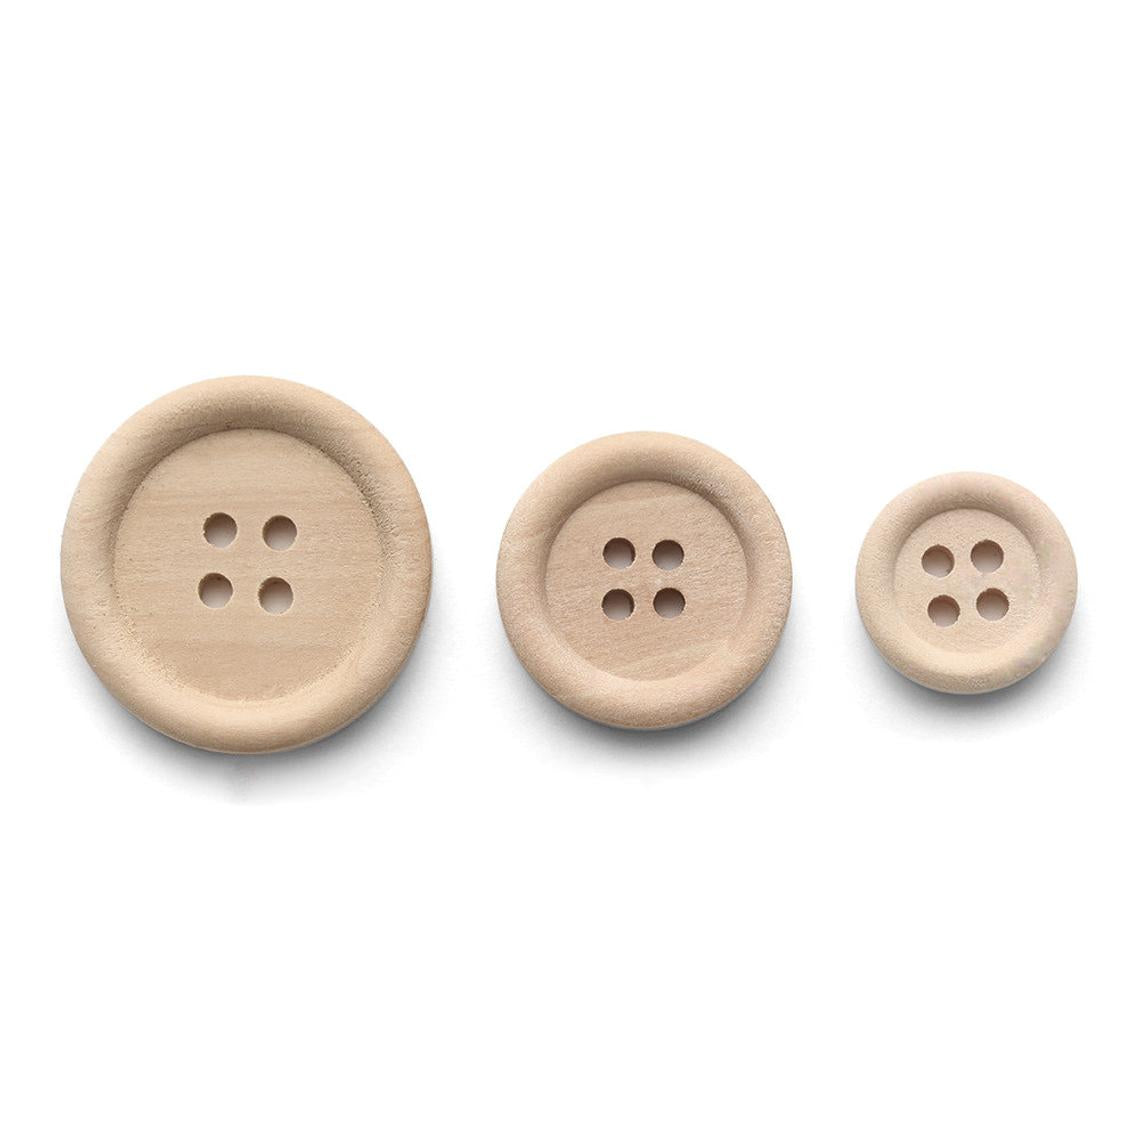 12 Natural unfinished wood buttons 15, 20 or 25mm